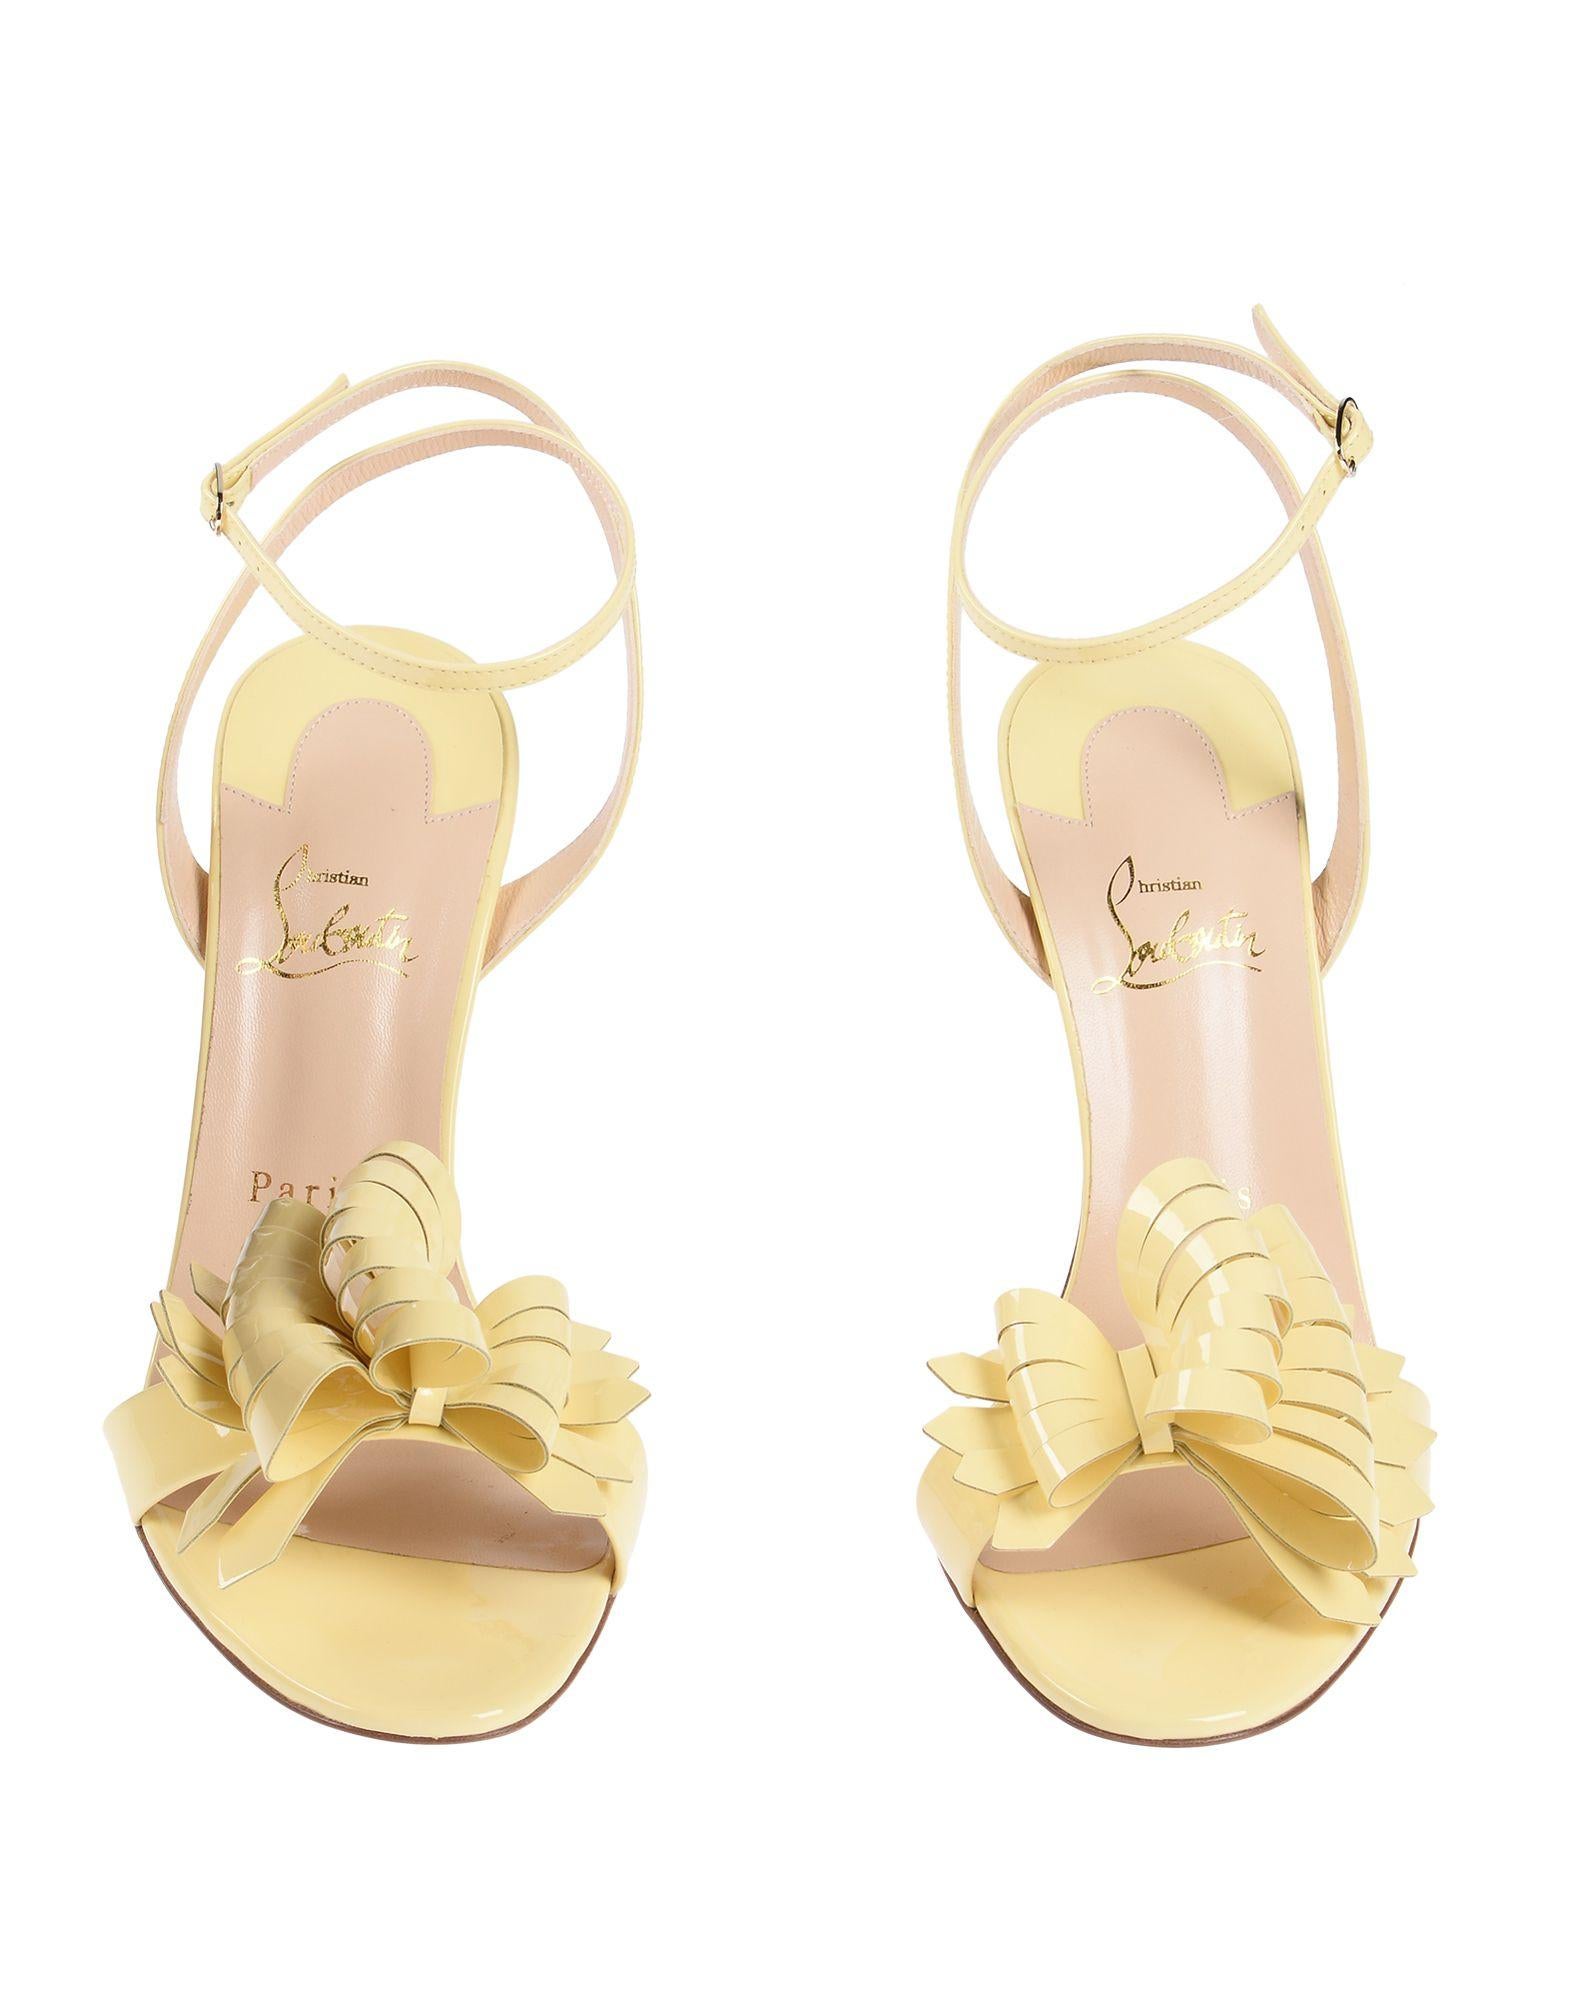 Christian Louboutin NEW Yellow Patent Bow Evening Sandals Heels in Box Damen